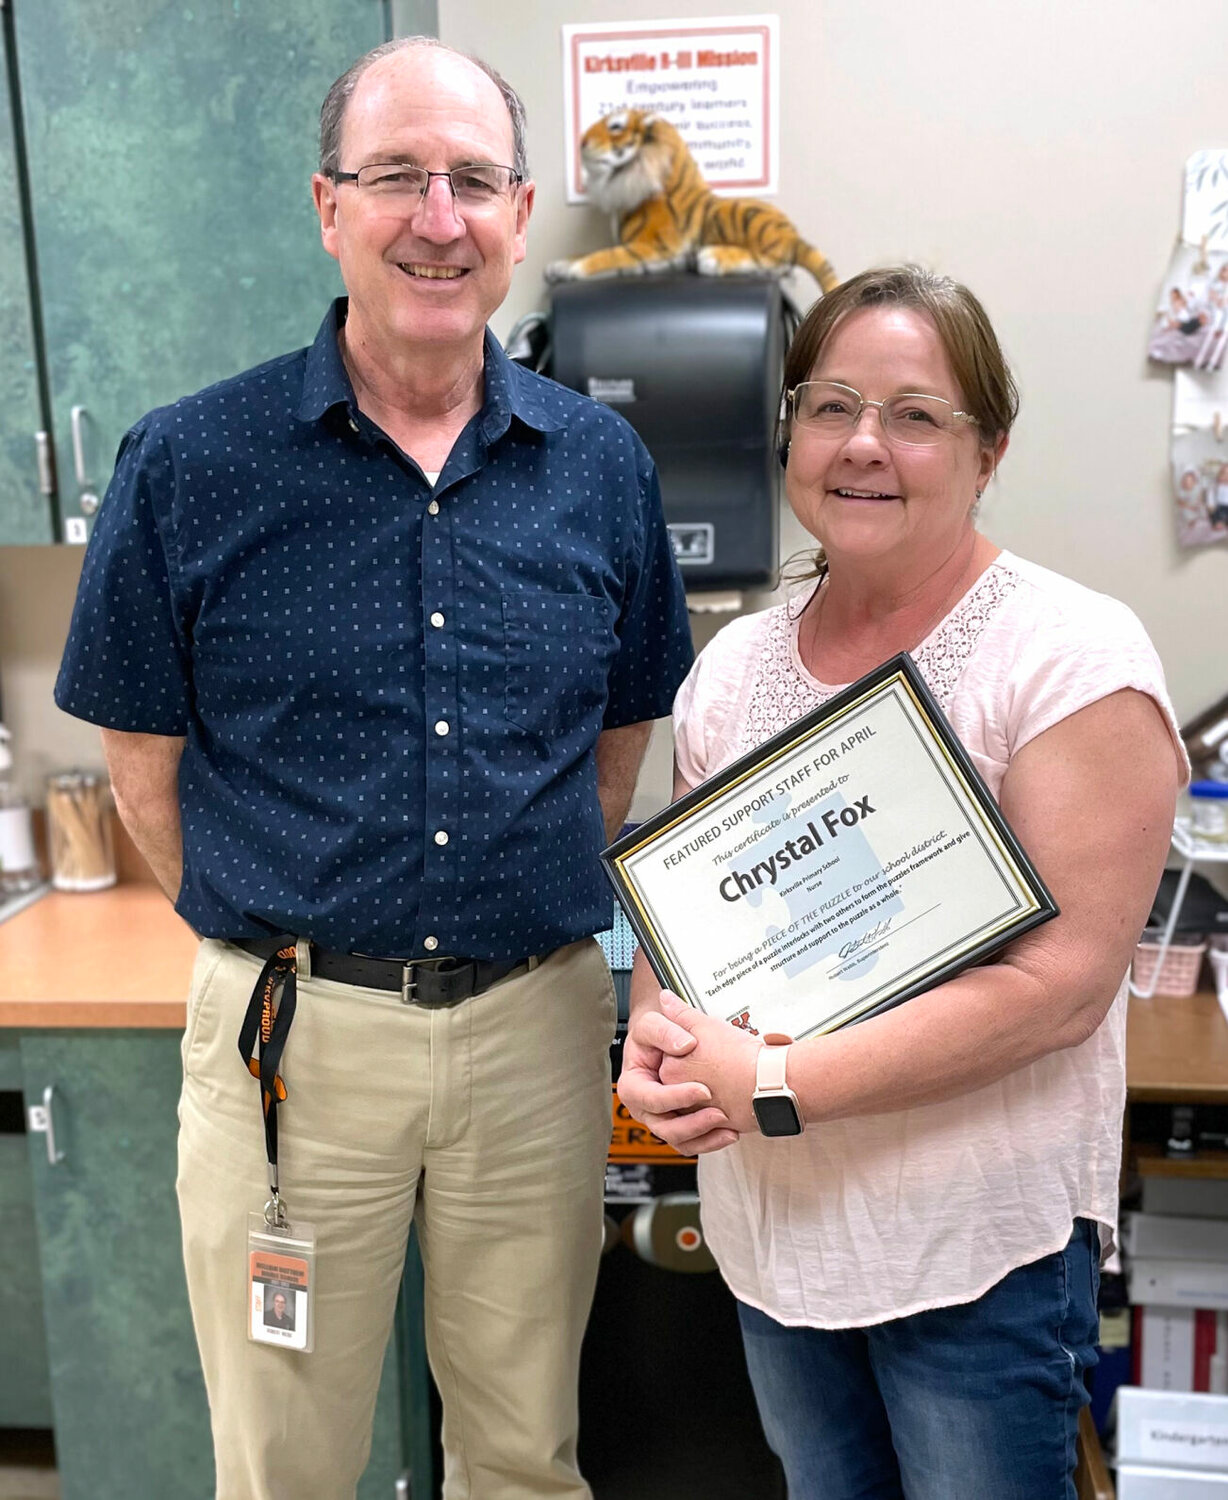 Chrystal Fox, originally from Eddyville, Iowa, has been a nurse for 33 years, seven of them at Kirksville Primary School. "Best job ever," she said about her work. 